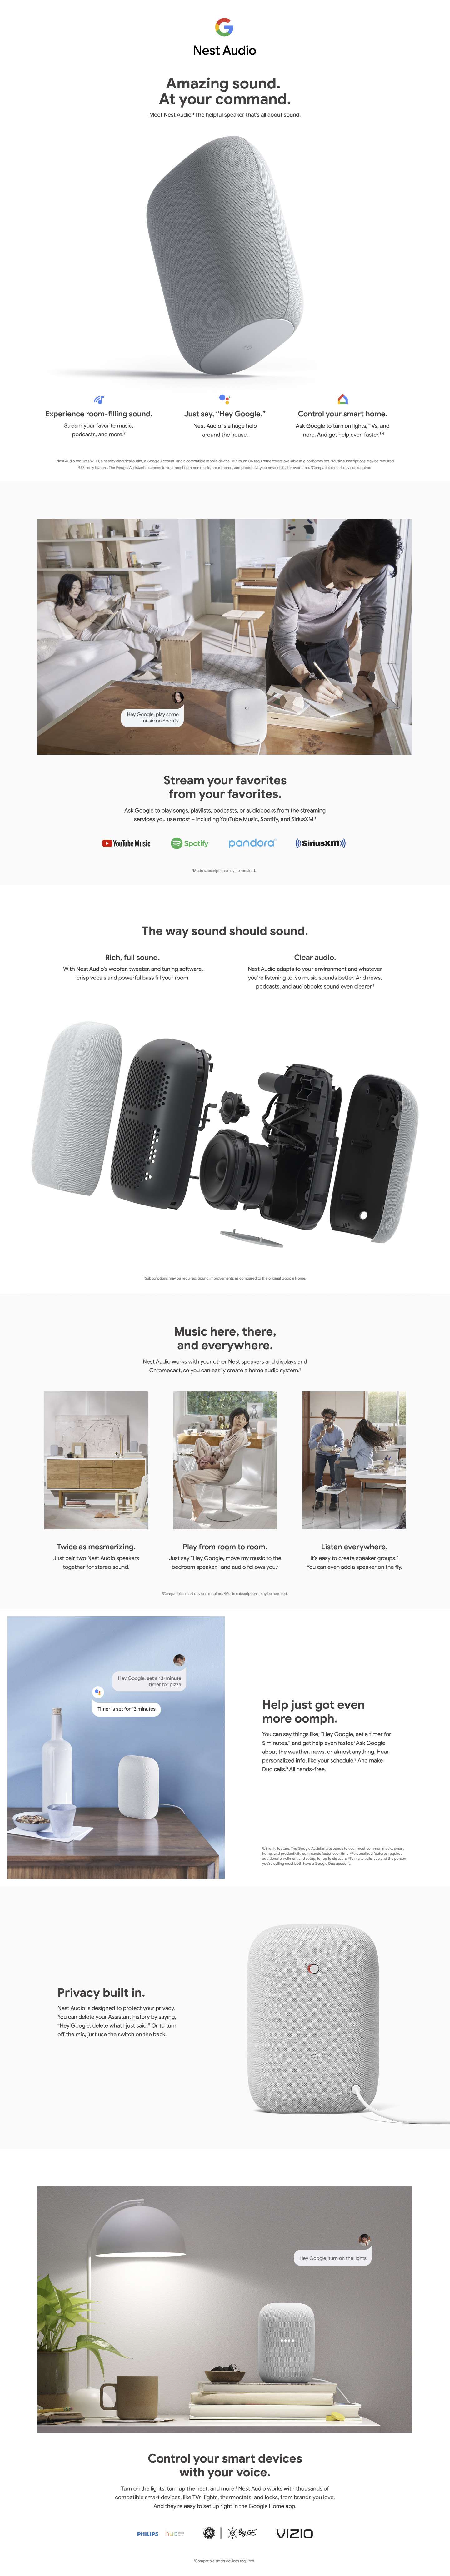 Smart Speakers & Home Audio Systems - Google Store